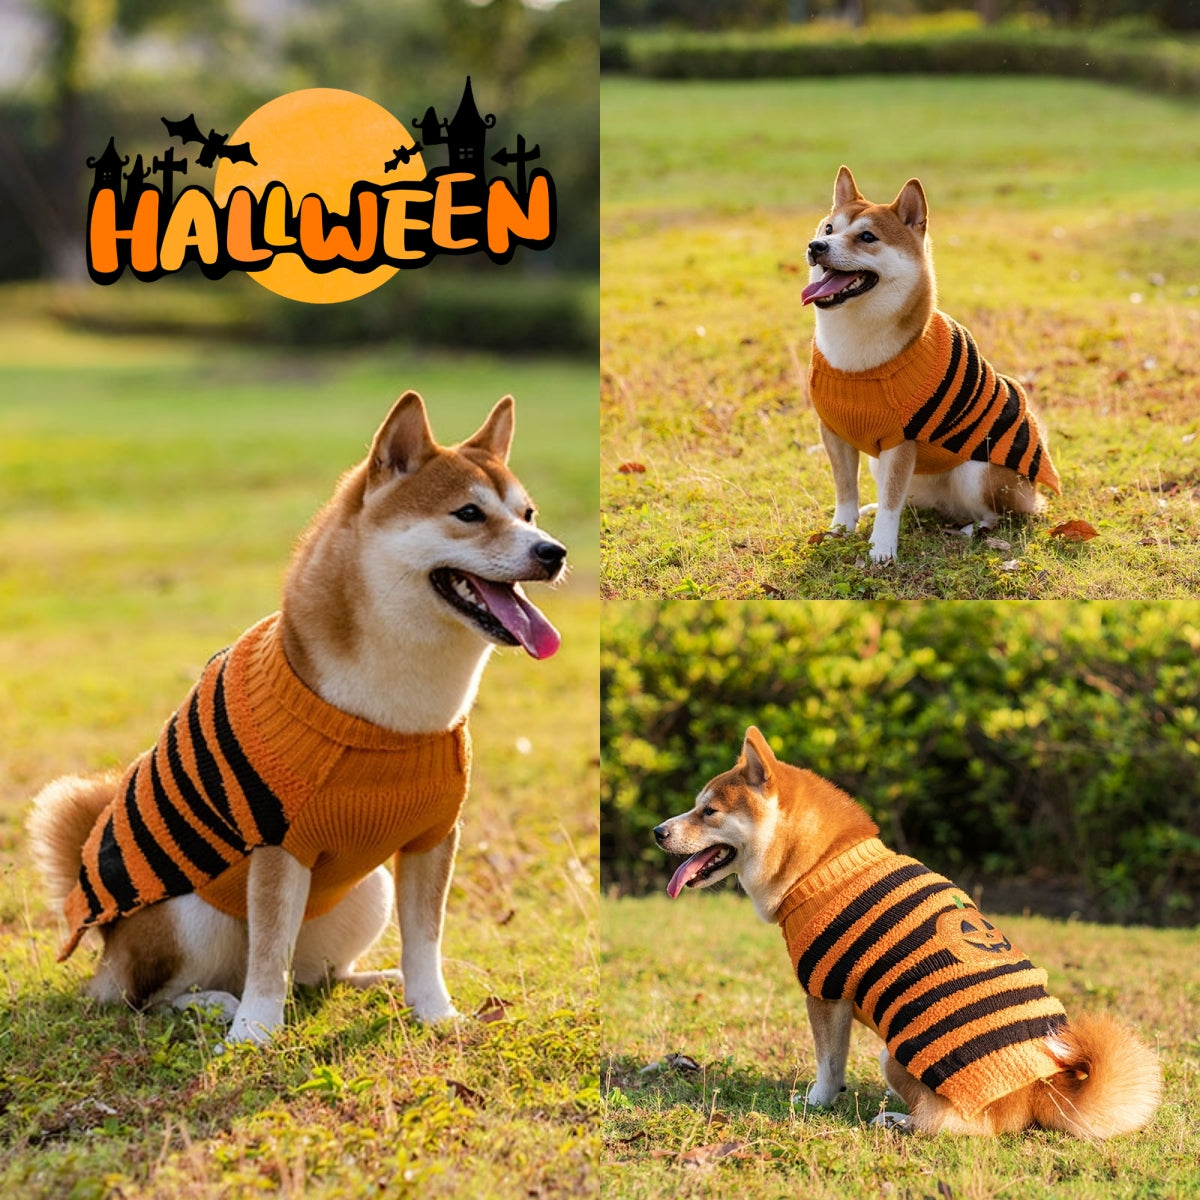 Halloween Dog Sweaters Pet Costume Teddy Warm Leisure Sweater Cosplay Clothes For Dogs Pets Outfits